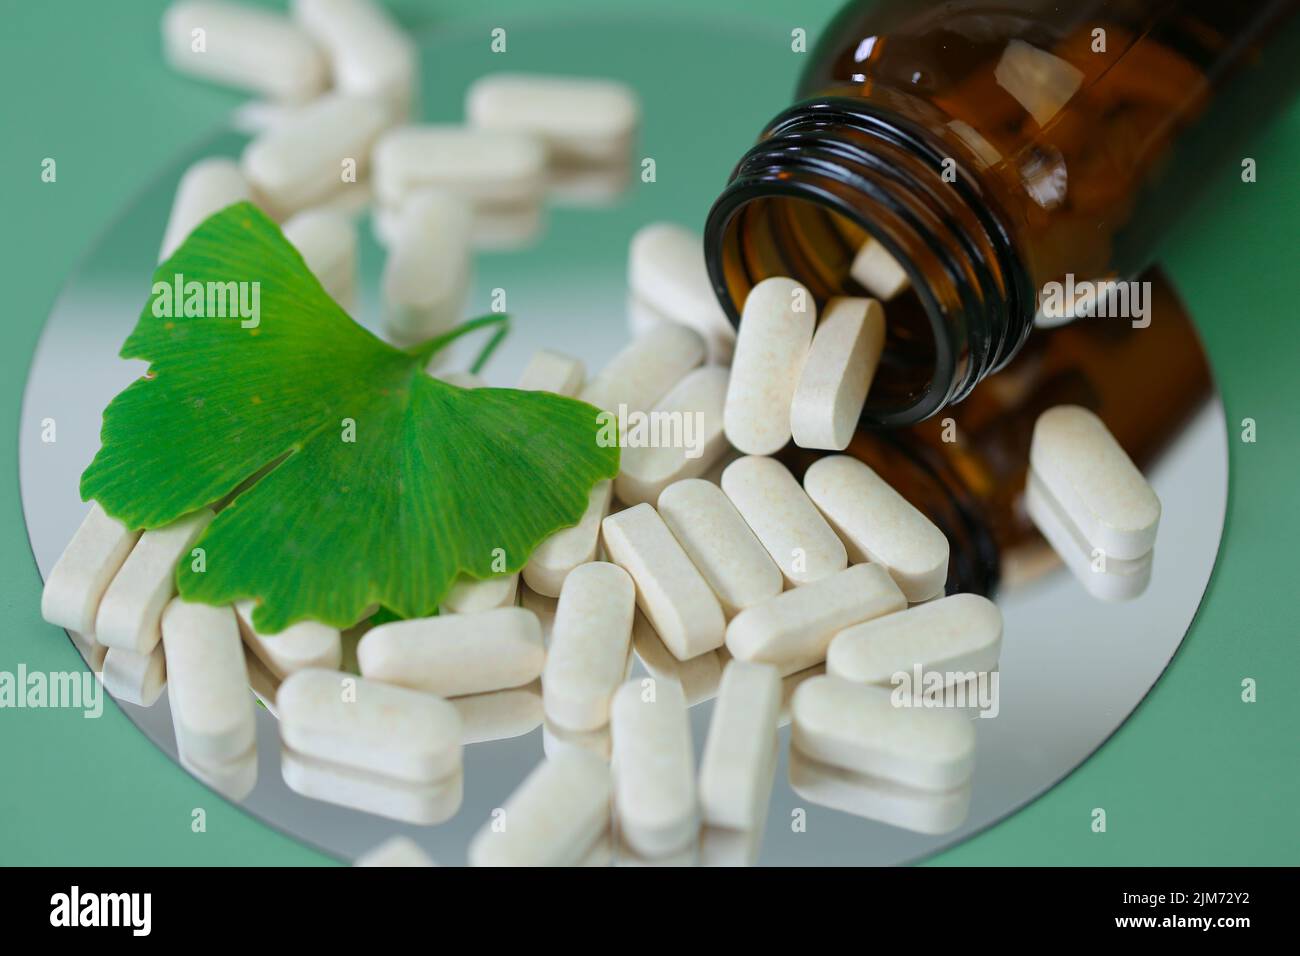 Preparations with ginkgo biloba extract.Alternative medicine and homeopathy.natural pharmacy. Stock Photo